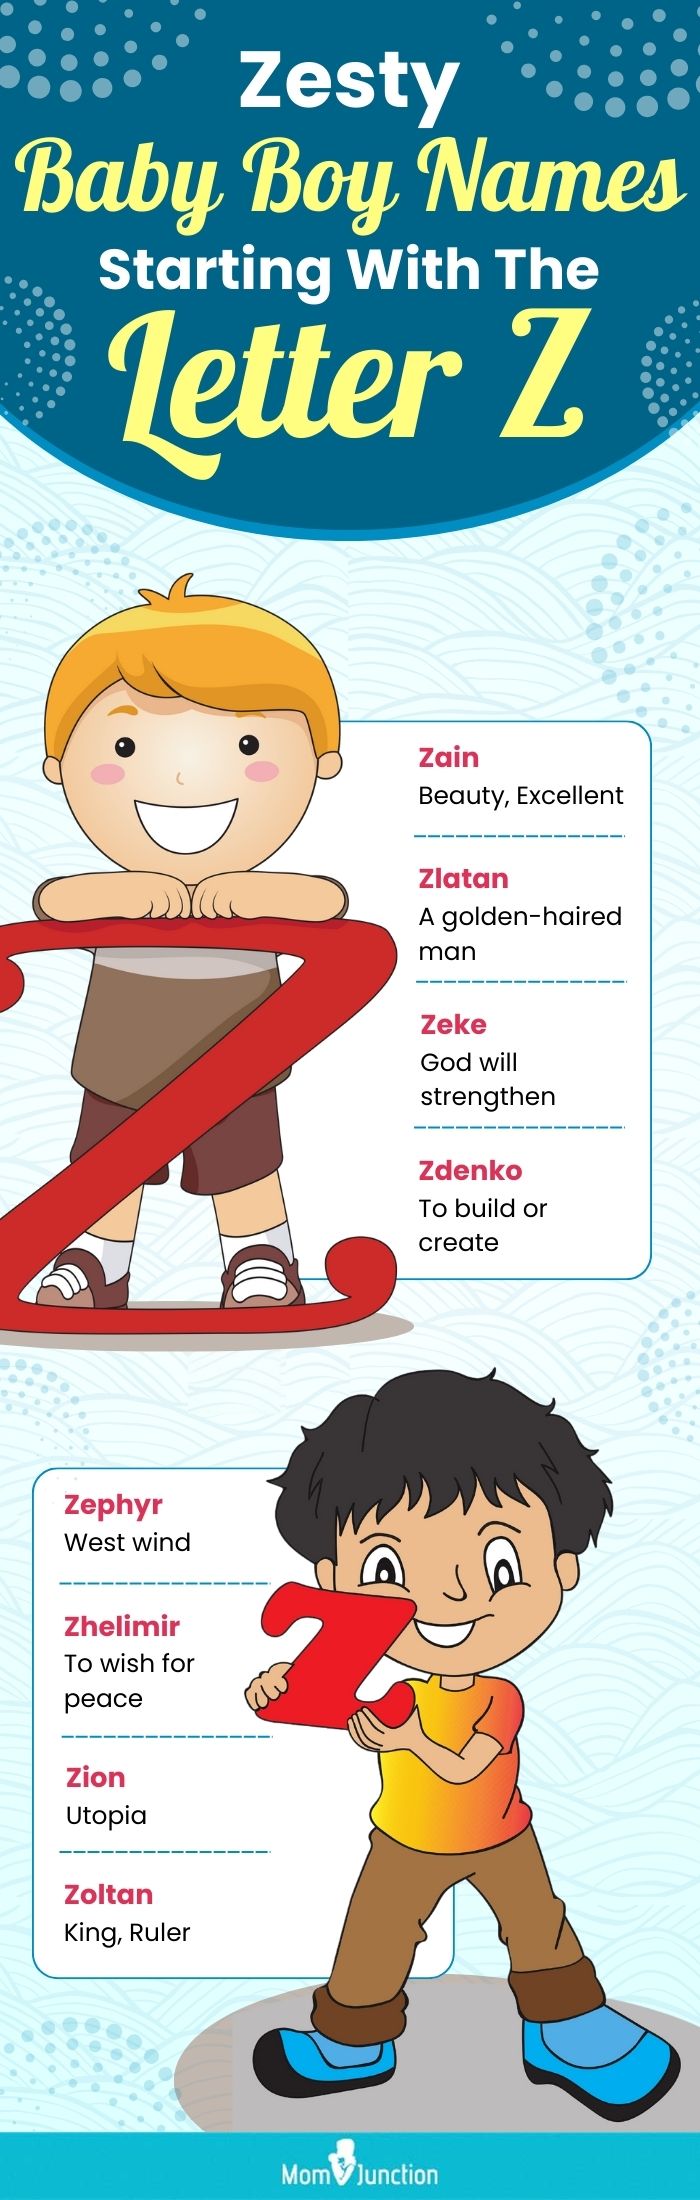 zesty baby boy names starting with the letter z (infographic)